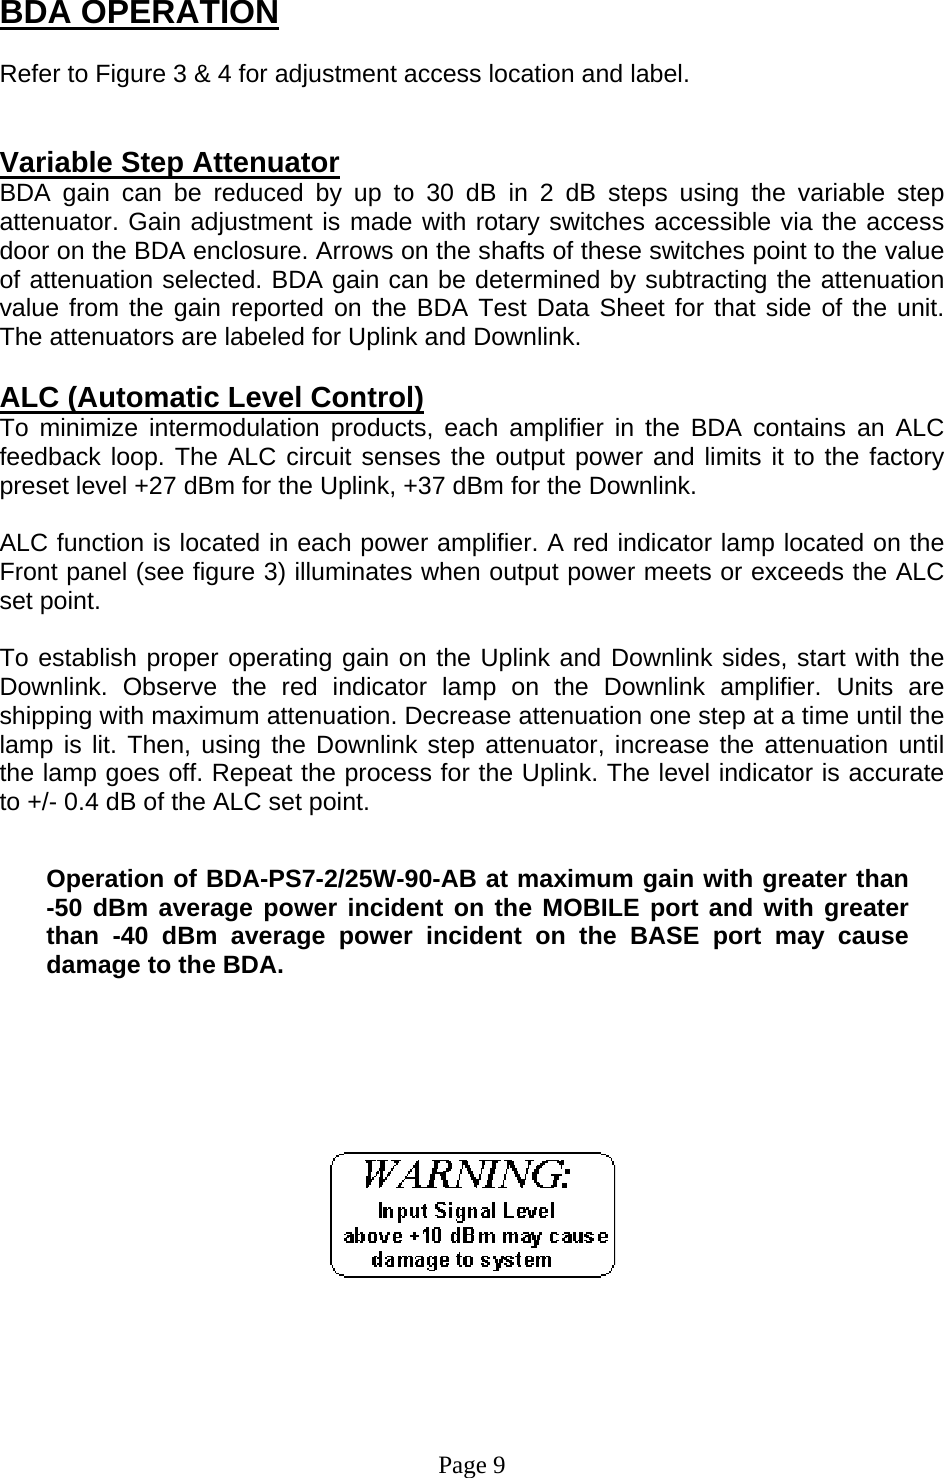 BDA OPERATION  Refer to Figure 3 &amp; 4 for adjustment access location and label.   Variable Step Attenuator BDA gain can be reduced by up to 30 dB in 2 dB steps using the variable step attenuator. Gain adjustment is made with rotary switches accessible via the access door on the BDA enclosure. Arrows on the shafts of these switches point to the value of attenuation selected. BDA gain can be determined by subtracting the attenuation value from the gain reported on the BDA Test Data Sheet for that side of the unit.  The attenuators are labeled for Uplink and Downlink.   ALC (Automatic Level Control)  To minimize intermodulation products, each amplifier in the BDA contains an ALC feedback loop. The ALC circuit senses the output power and limits it to the factory preset level +27 dBm for the Uplink, +37 dBm for the Downlink.   ALC function is located in each power amplifier. A red indicator lamp located on the Front panel (see figure 3) illuminates when output power meets or exceeds the ALC set point.   To establish proper operating gain on the Uplink and Downlink sides, start with the Downlink. Observe the red indicator lamp on the Downlink amplifier. Units are shipping with maximum attenuation. Decrease attenuation one step at a time until the lamp is lit. Then, using the Downlink step attenuator, increase the attenuation until the lamp goes off. Repeat the process for the Uplink. The level indicator is accurate to +/- 0.4 dB of the ALC set point.    Operation of BDA-PS7-2/25W-90-AB at maximum gain with greater than   -50 dBm average power incident on the MOBILE port and with greater than -40 dBm average power incident on the BASE port may cause damage to the BDA.              Page 9 